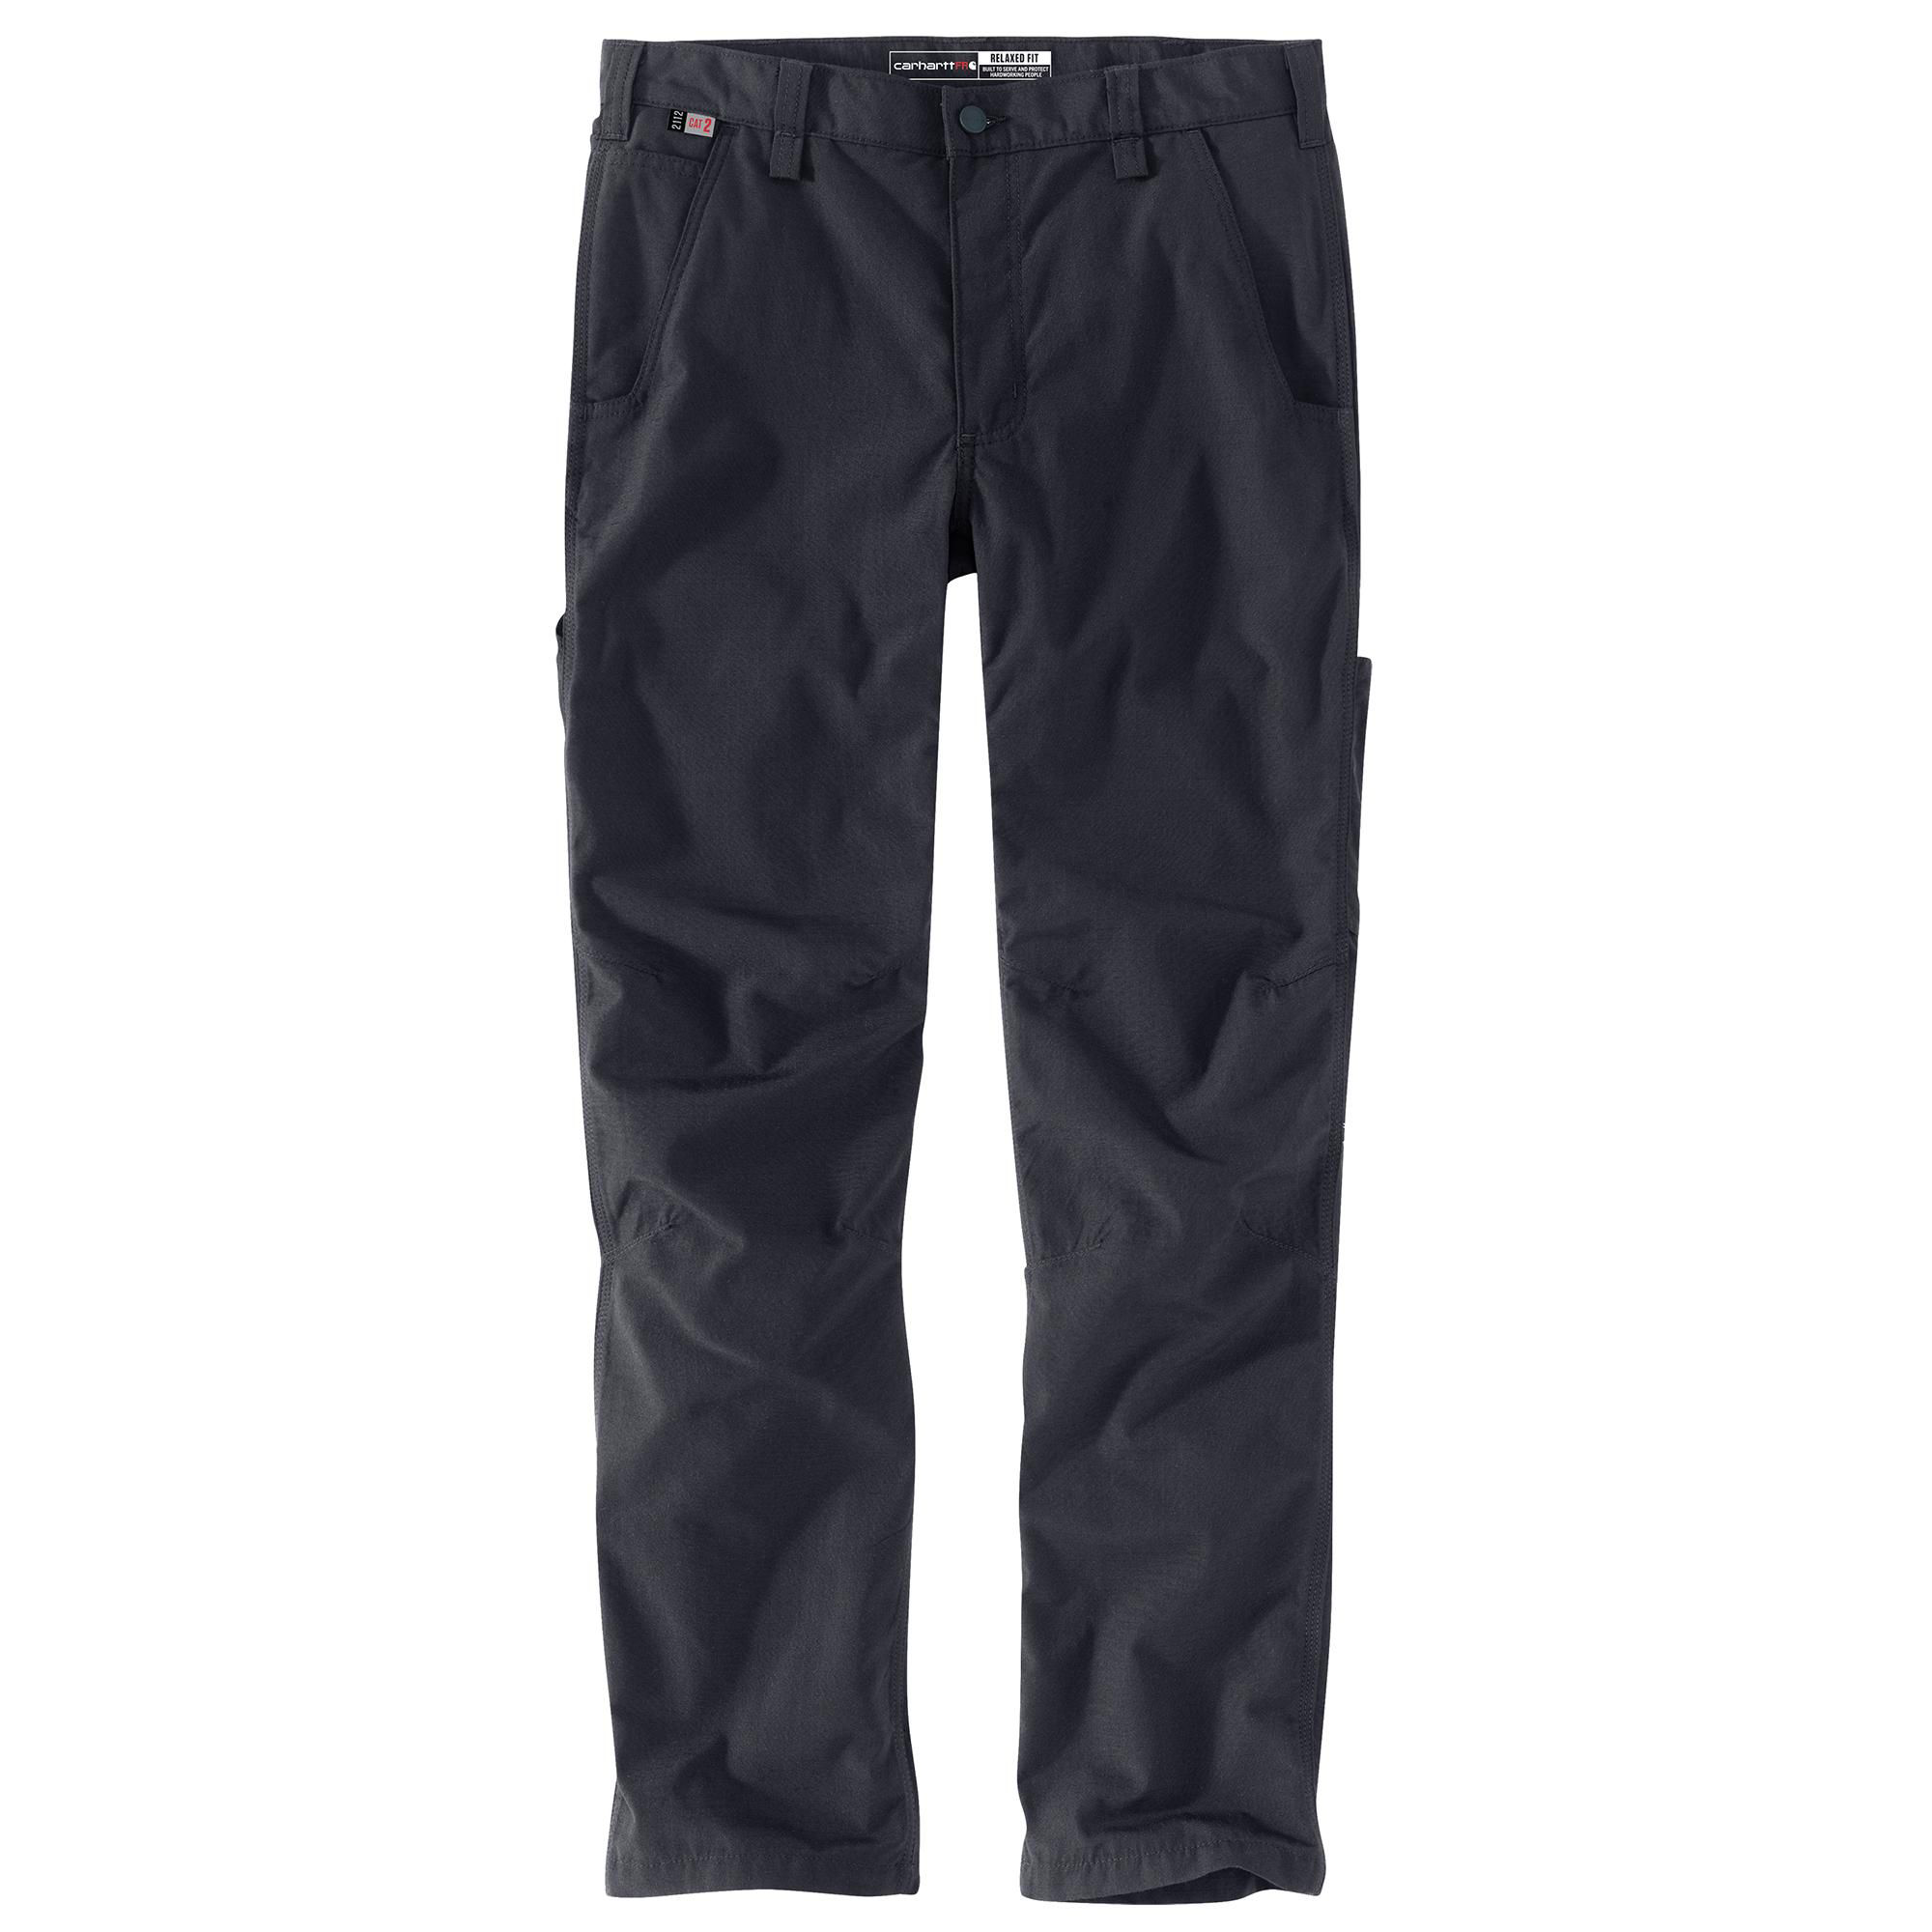 Carhartt Flame-Resistant Force Relaxed-Fit Ripstop Utility Work Pants for Men - Deep Navy - 36x32